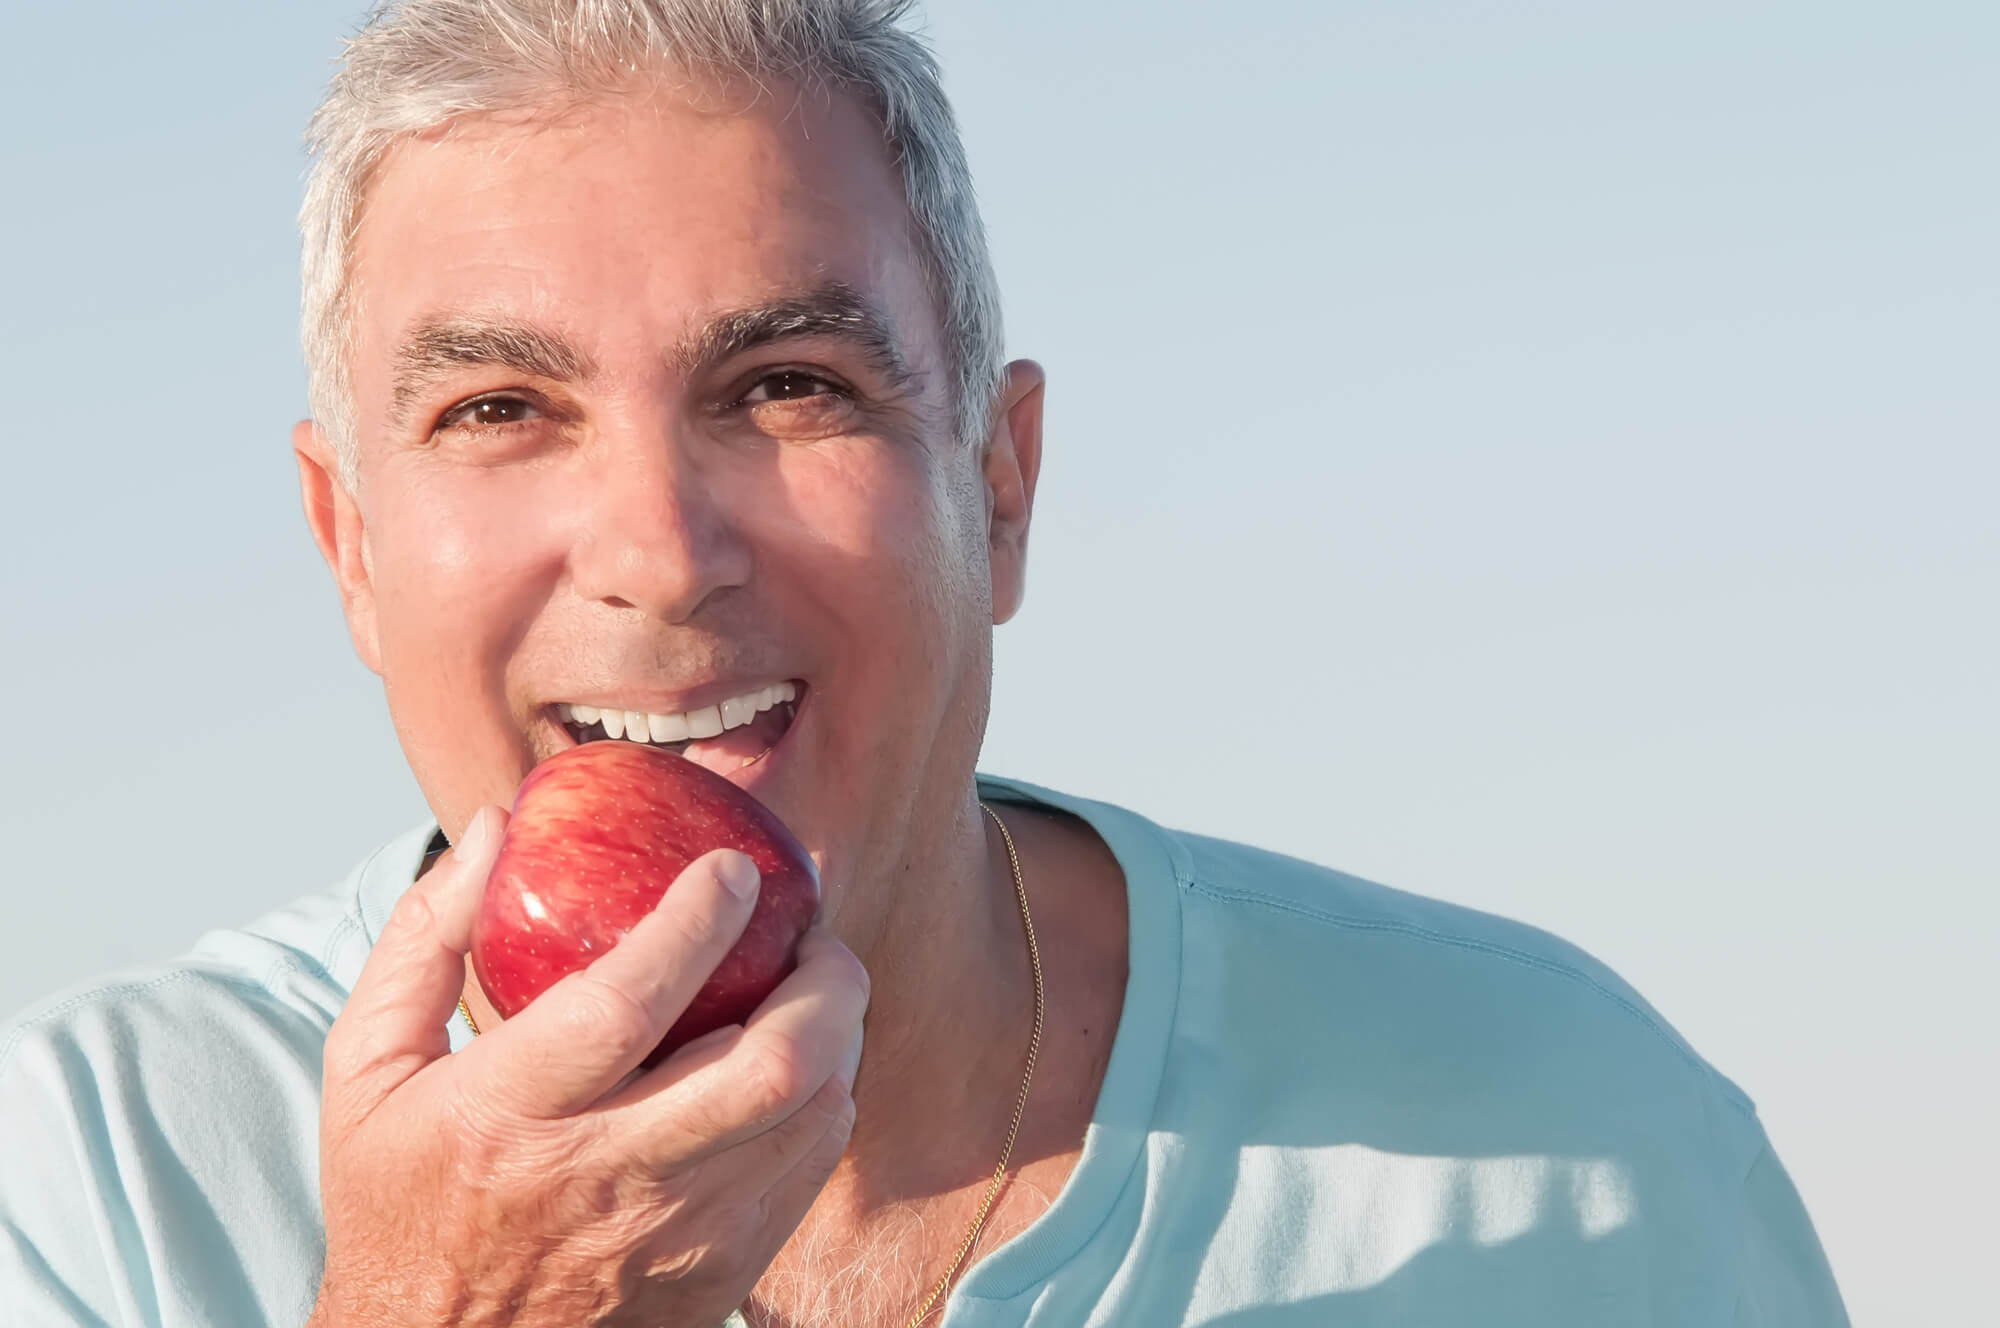 where are the best dental implants miami?